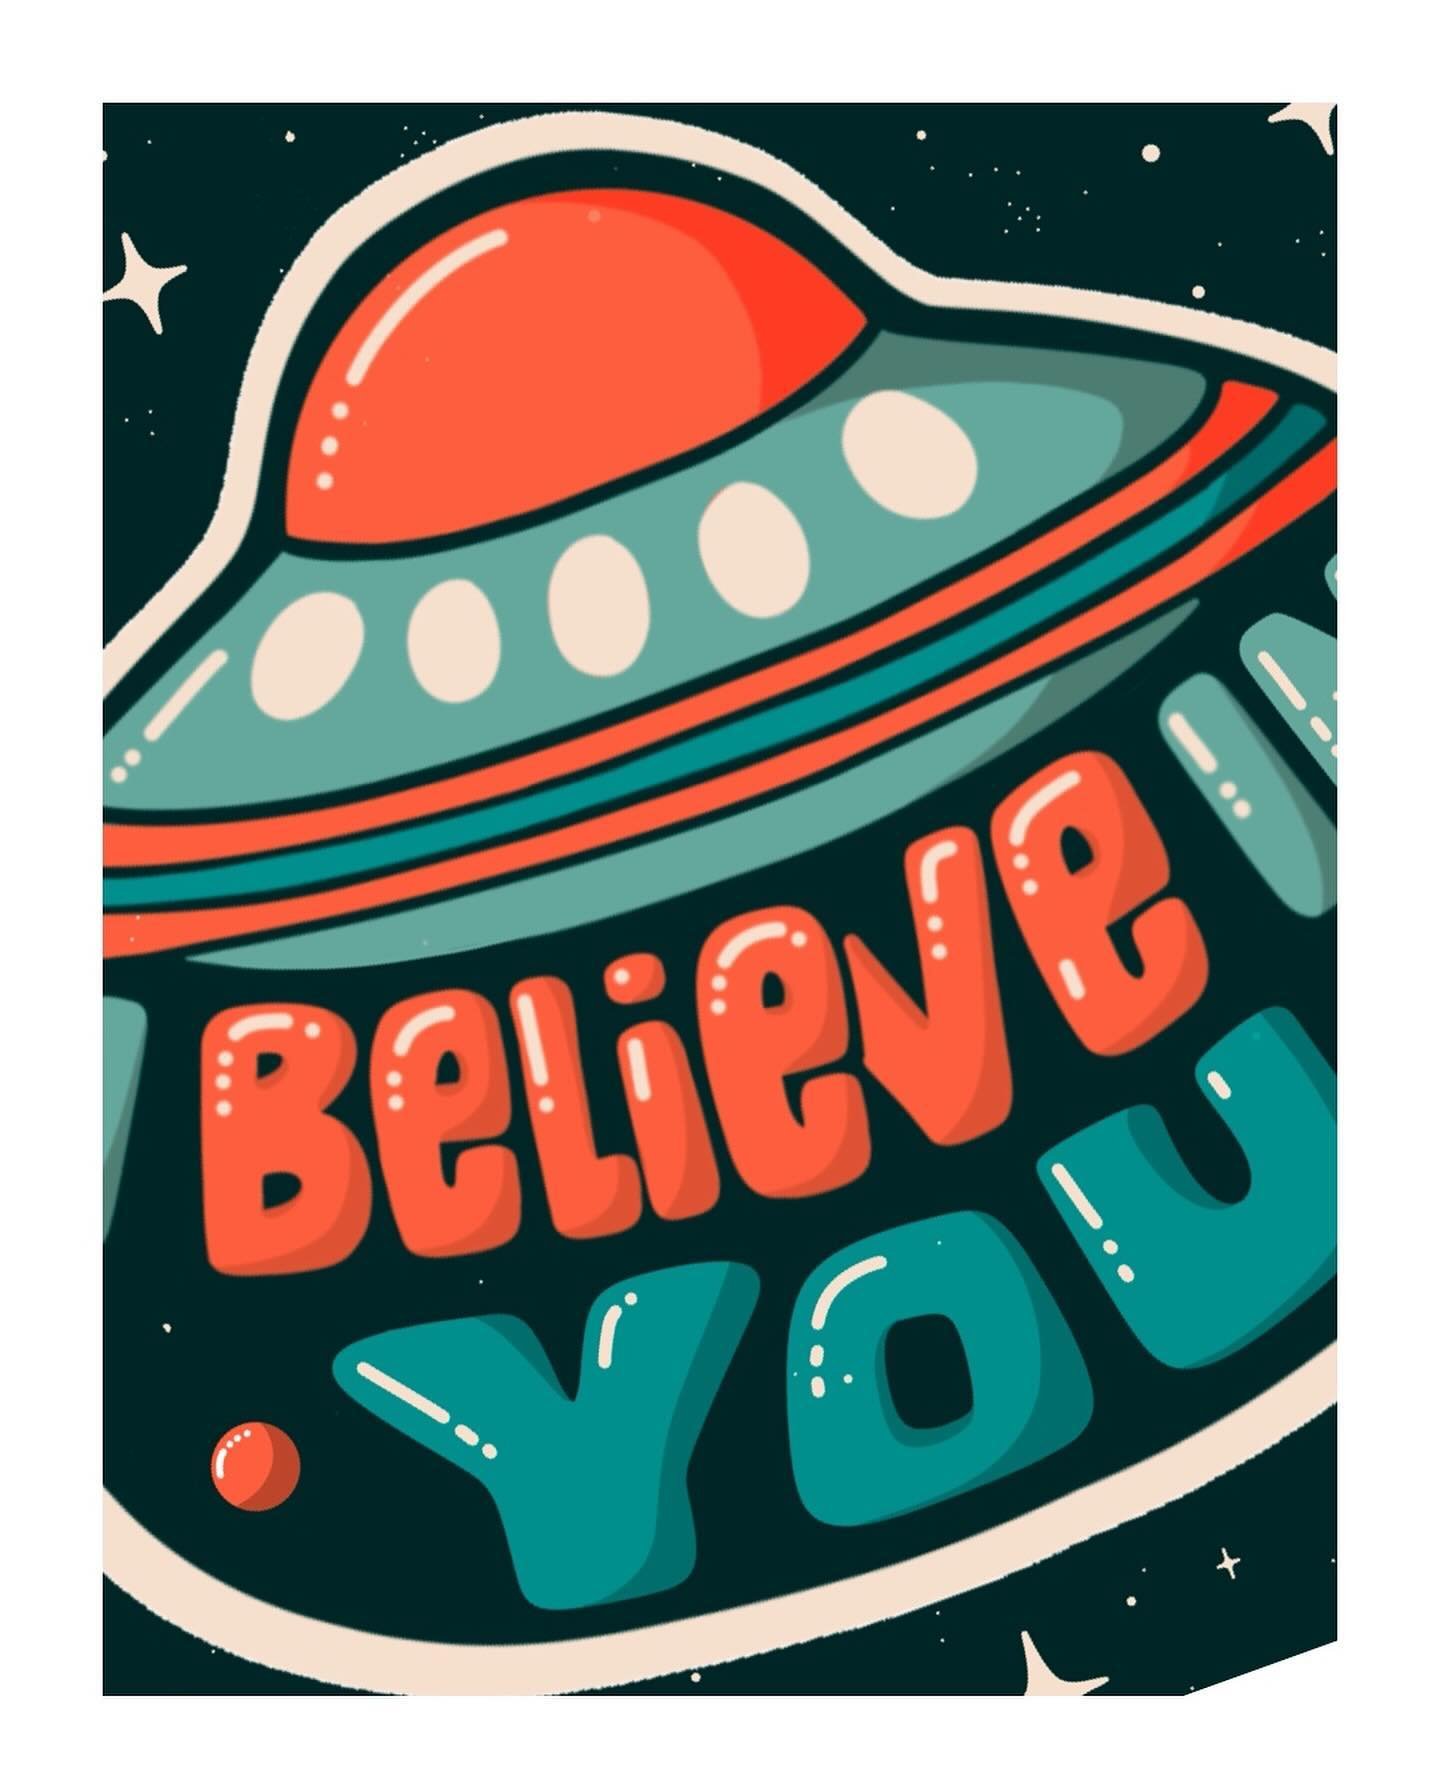 Went back to my X-Files obsession and decided it would make a fun card! You just have to believe 👽

#imagesbycassandra_designs #cassandraoleary #iwanttobelieve #ibelieveinyou #greetingcard #greetingcarddesign #illustration